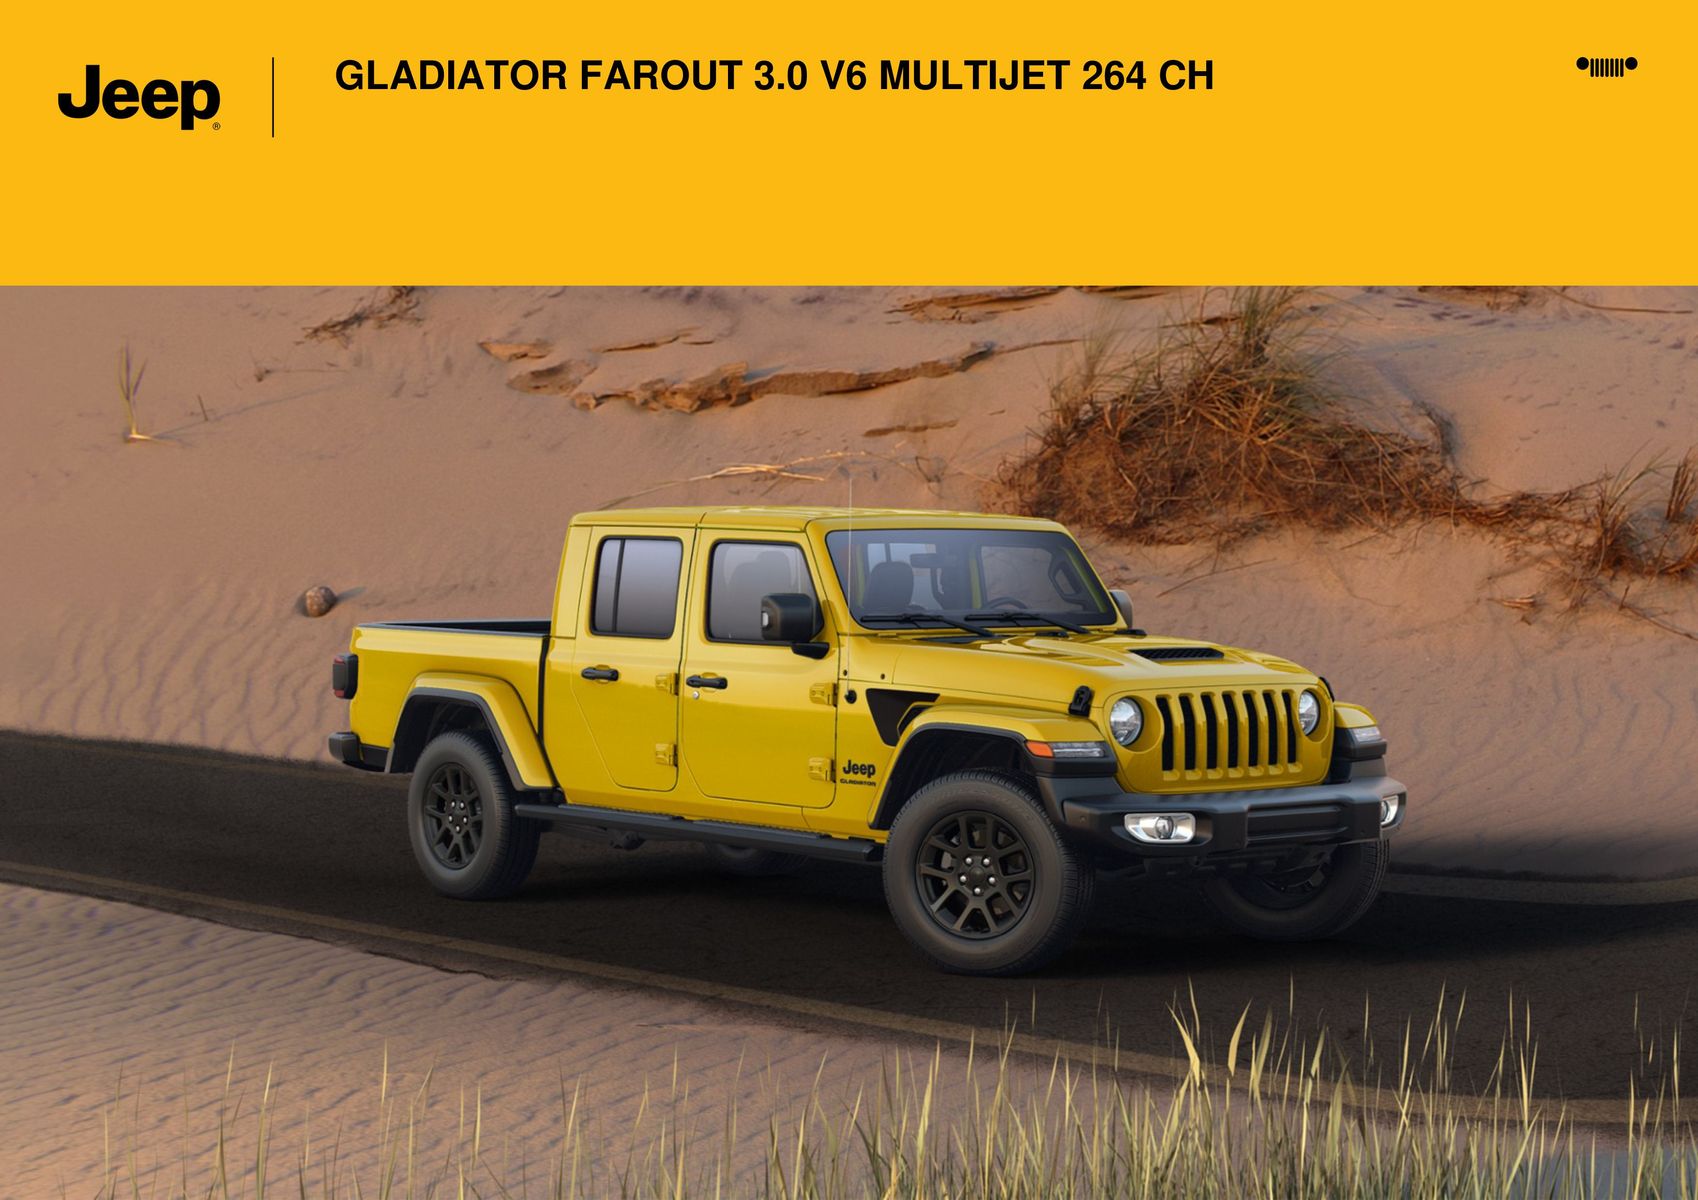 Catalogue GLADIATOR FAROUT 3.0 V6 MULTIJET 264 CH', page 00001